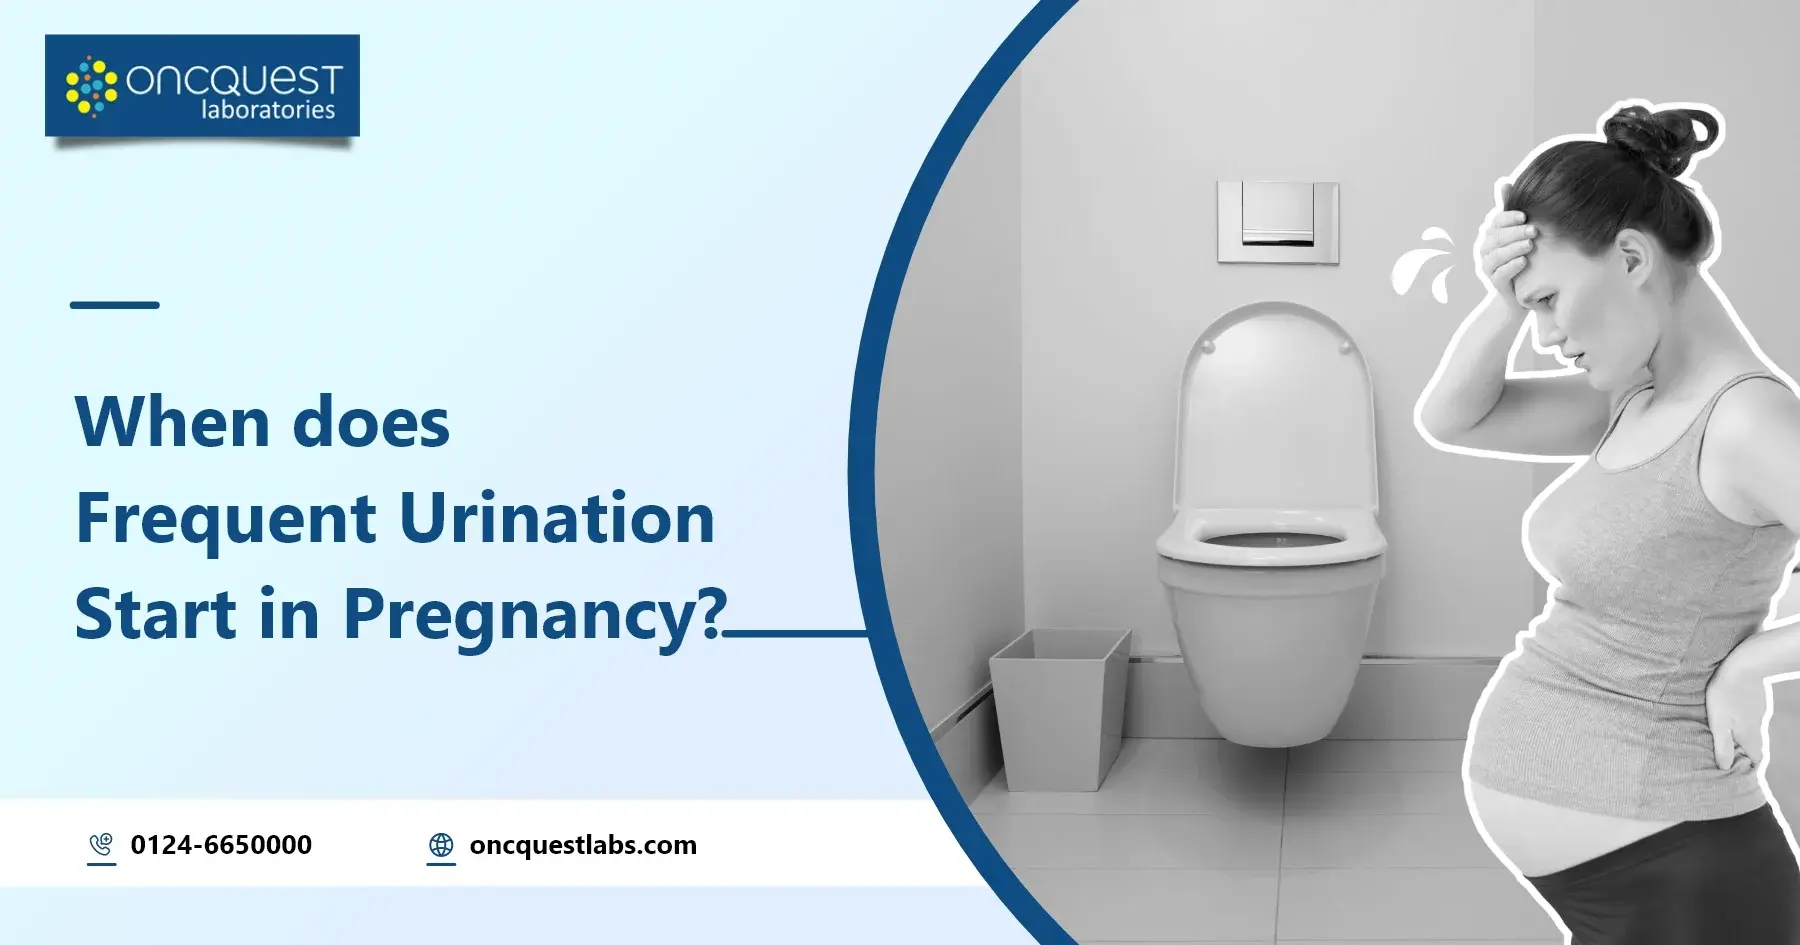 Frequent urination in pregnancy